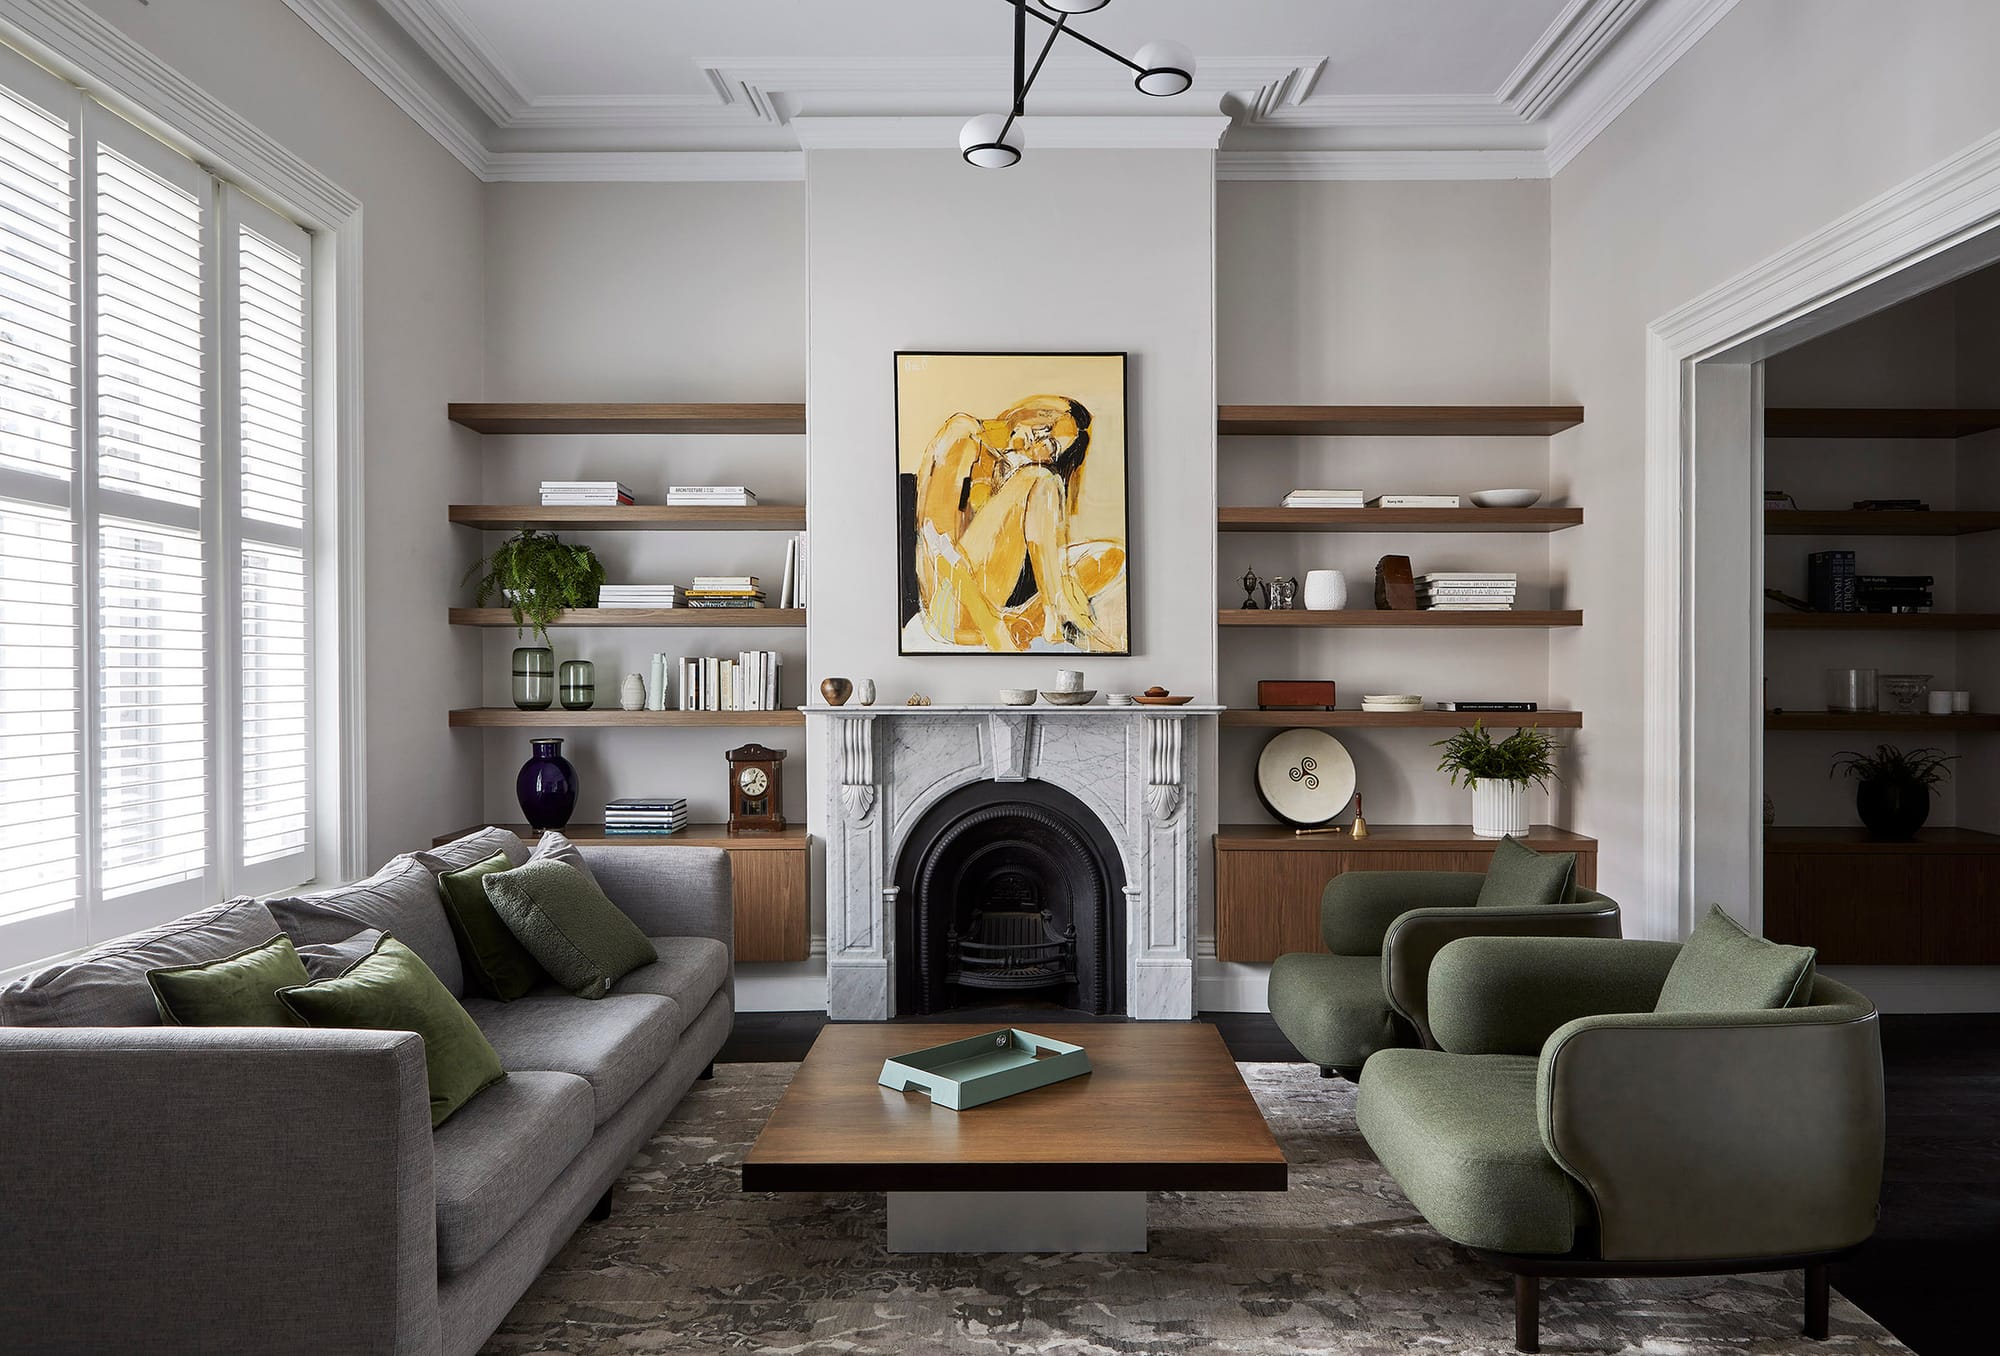 Village Studio by mcmahon and nerlich. Photography by Dave Kulesza. Marble fireplace, grey and green couch and armchairs. Floating timber shelves.